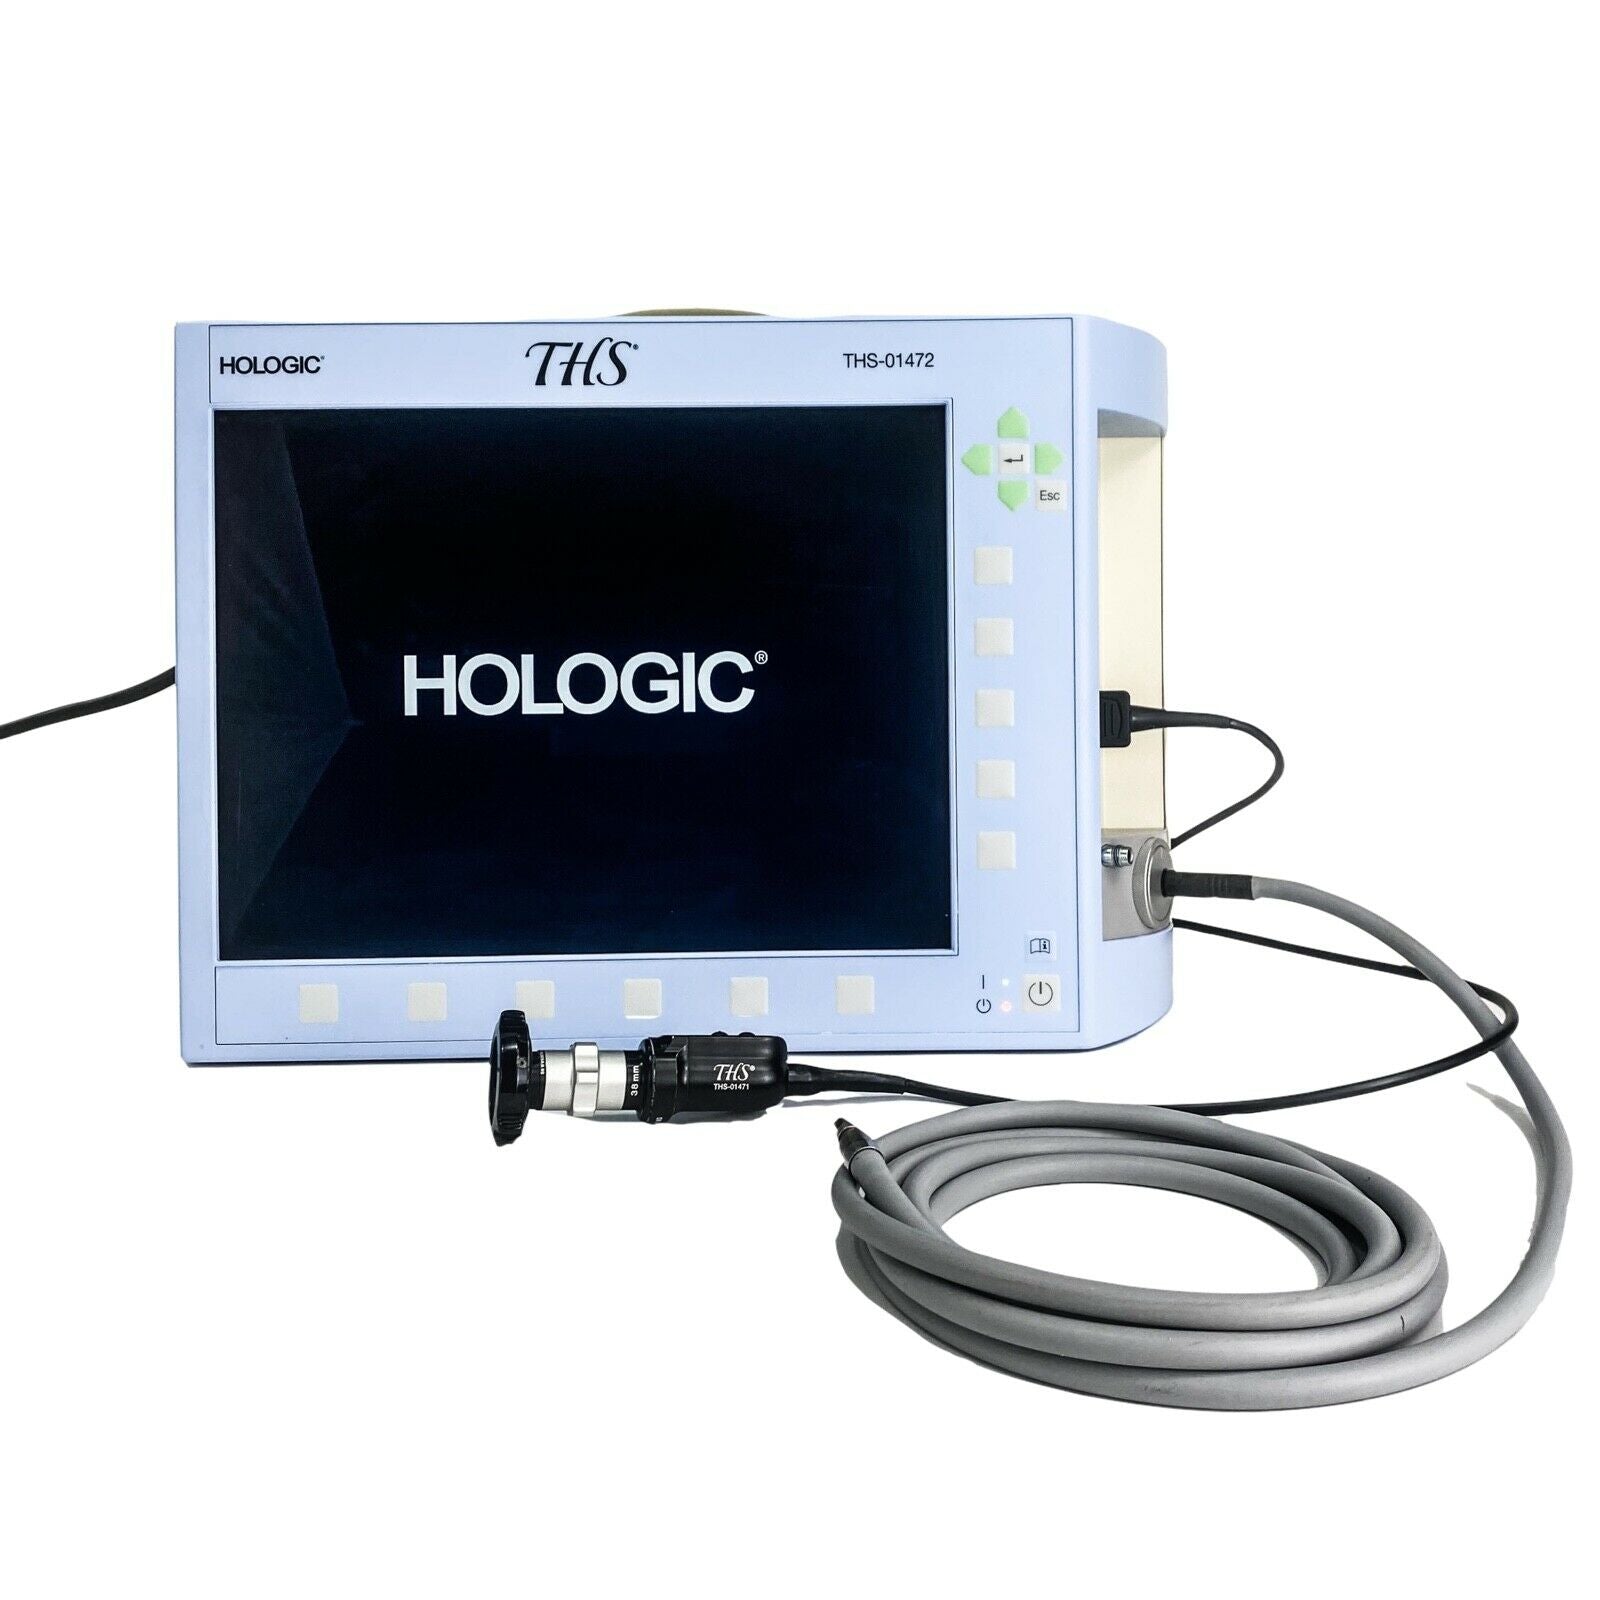 HOLOGIC THS-01472 Hysteroscope Video System - All in 1 - Camera, Light